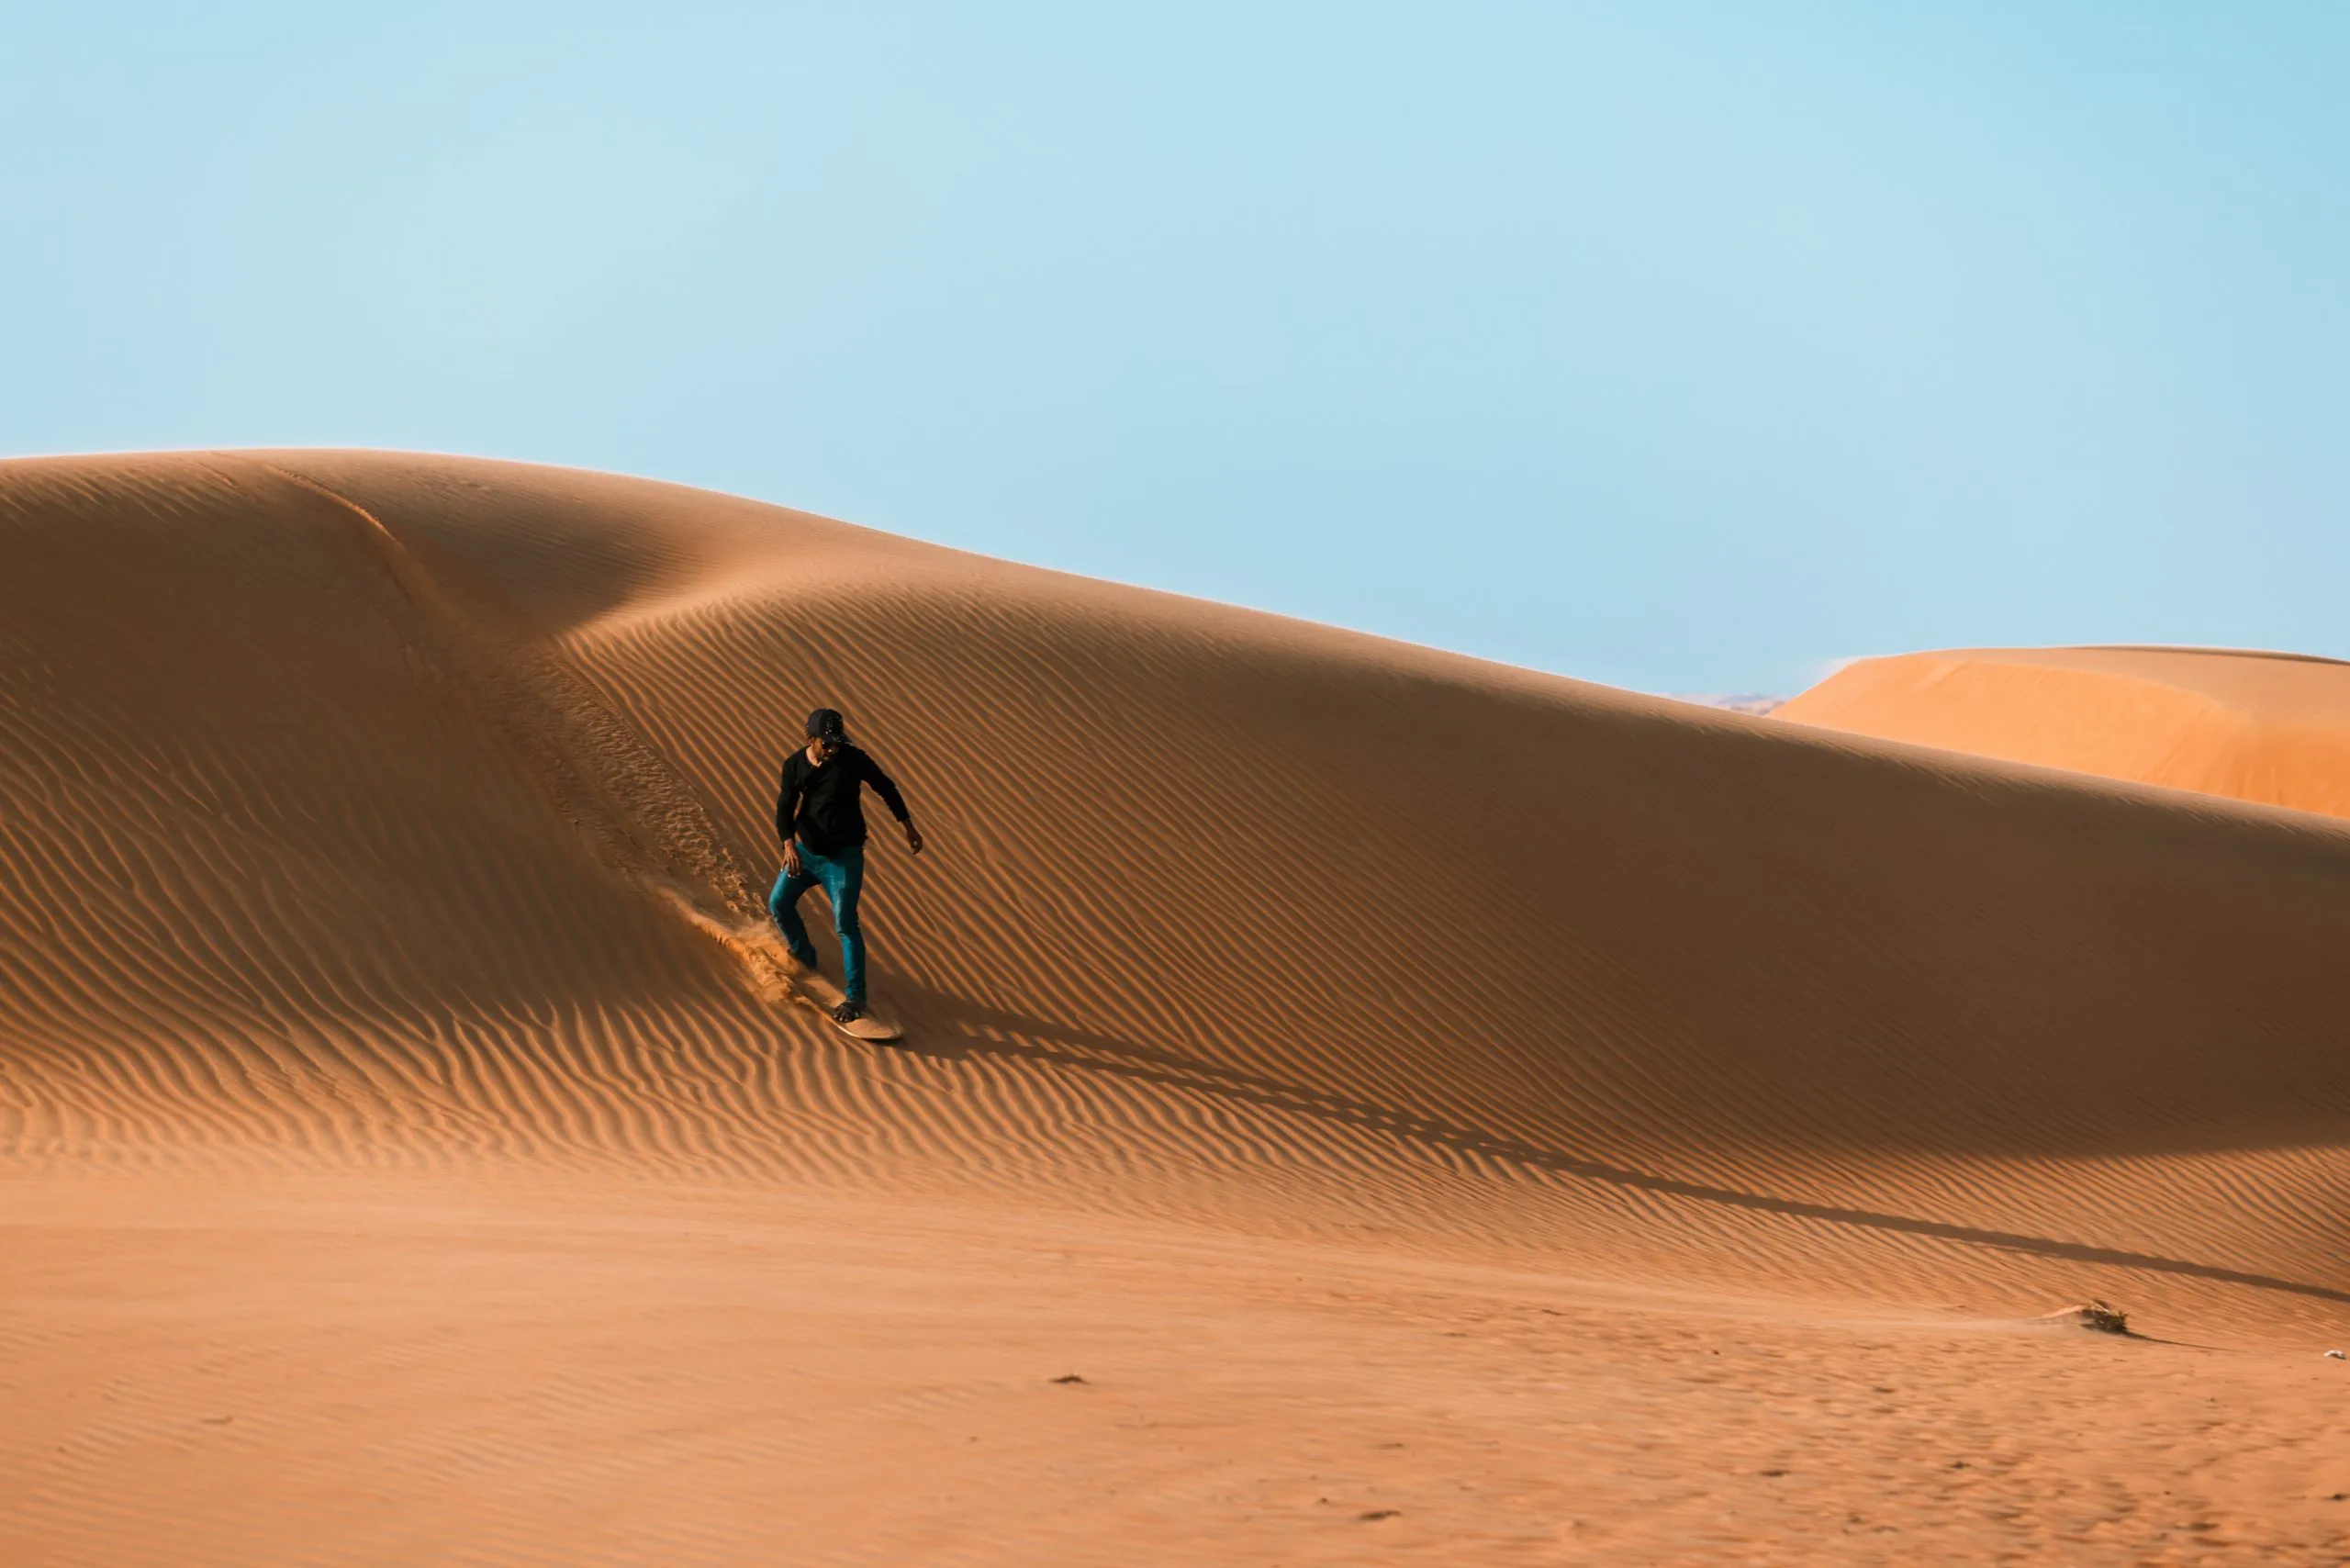 High quality stock photo of a man sliding down with a sand board in a dune in the Sultanate of Oman.